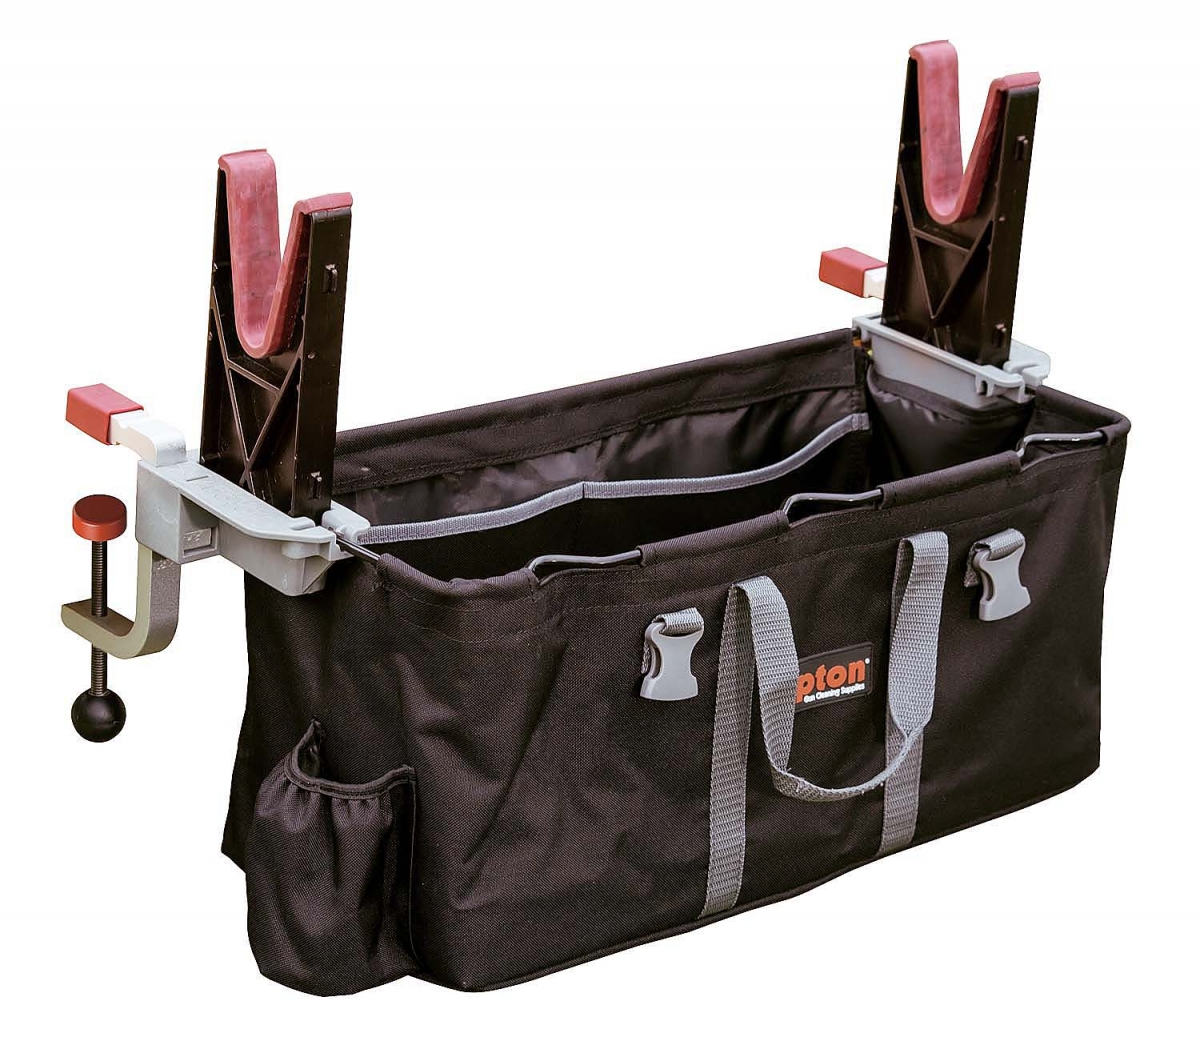 The Tipton® Transporter Range Vise is the perfect addition to your next trip to the range